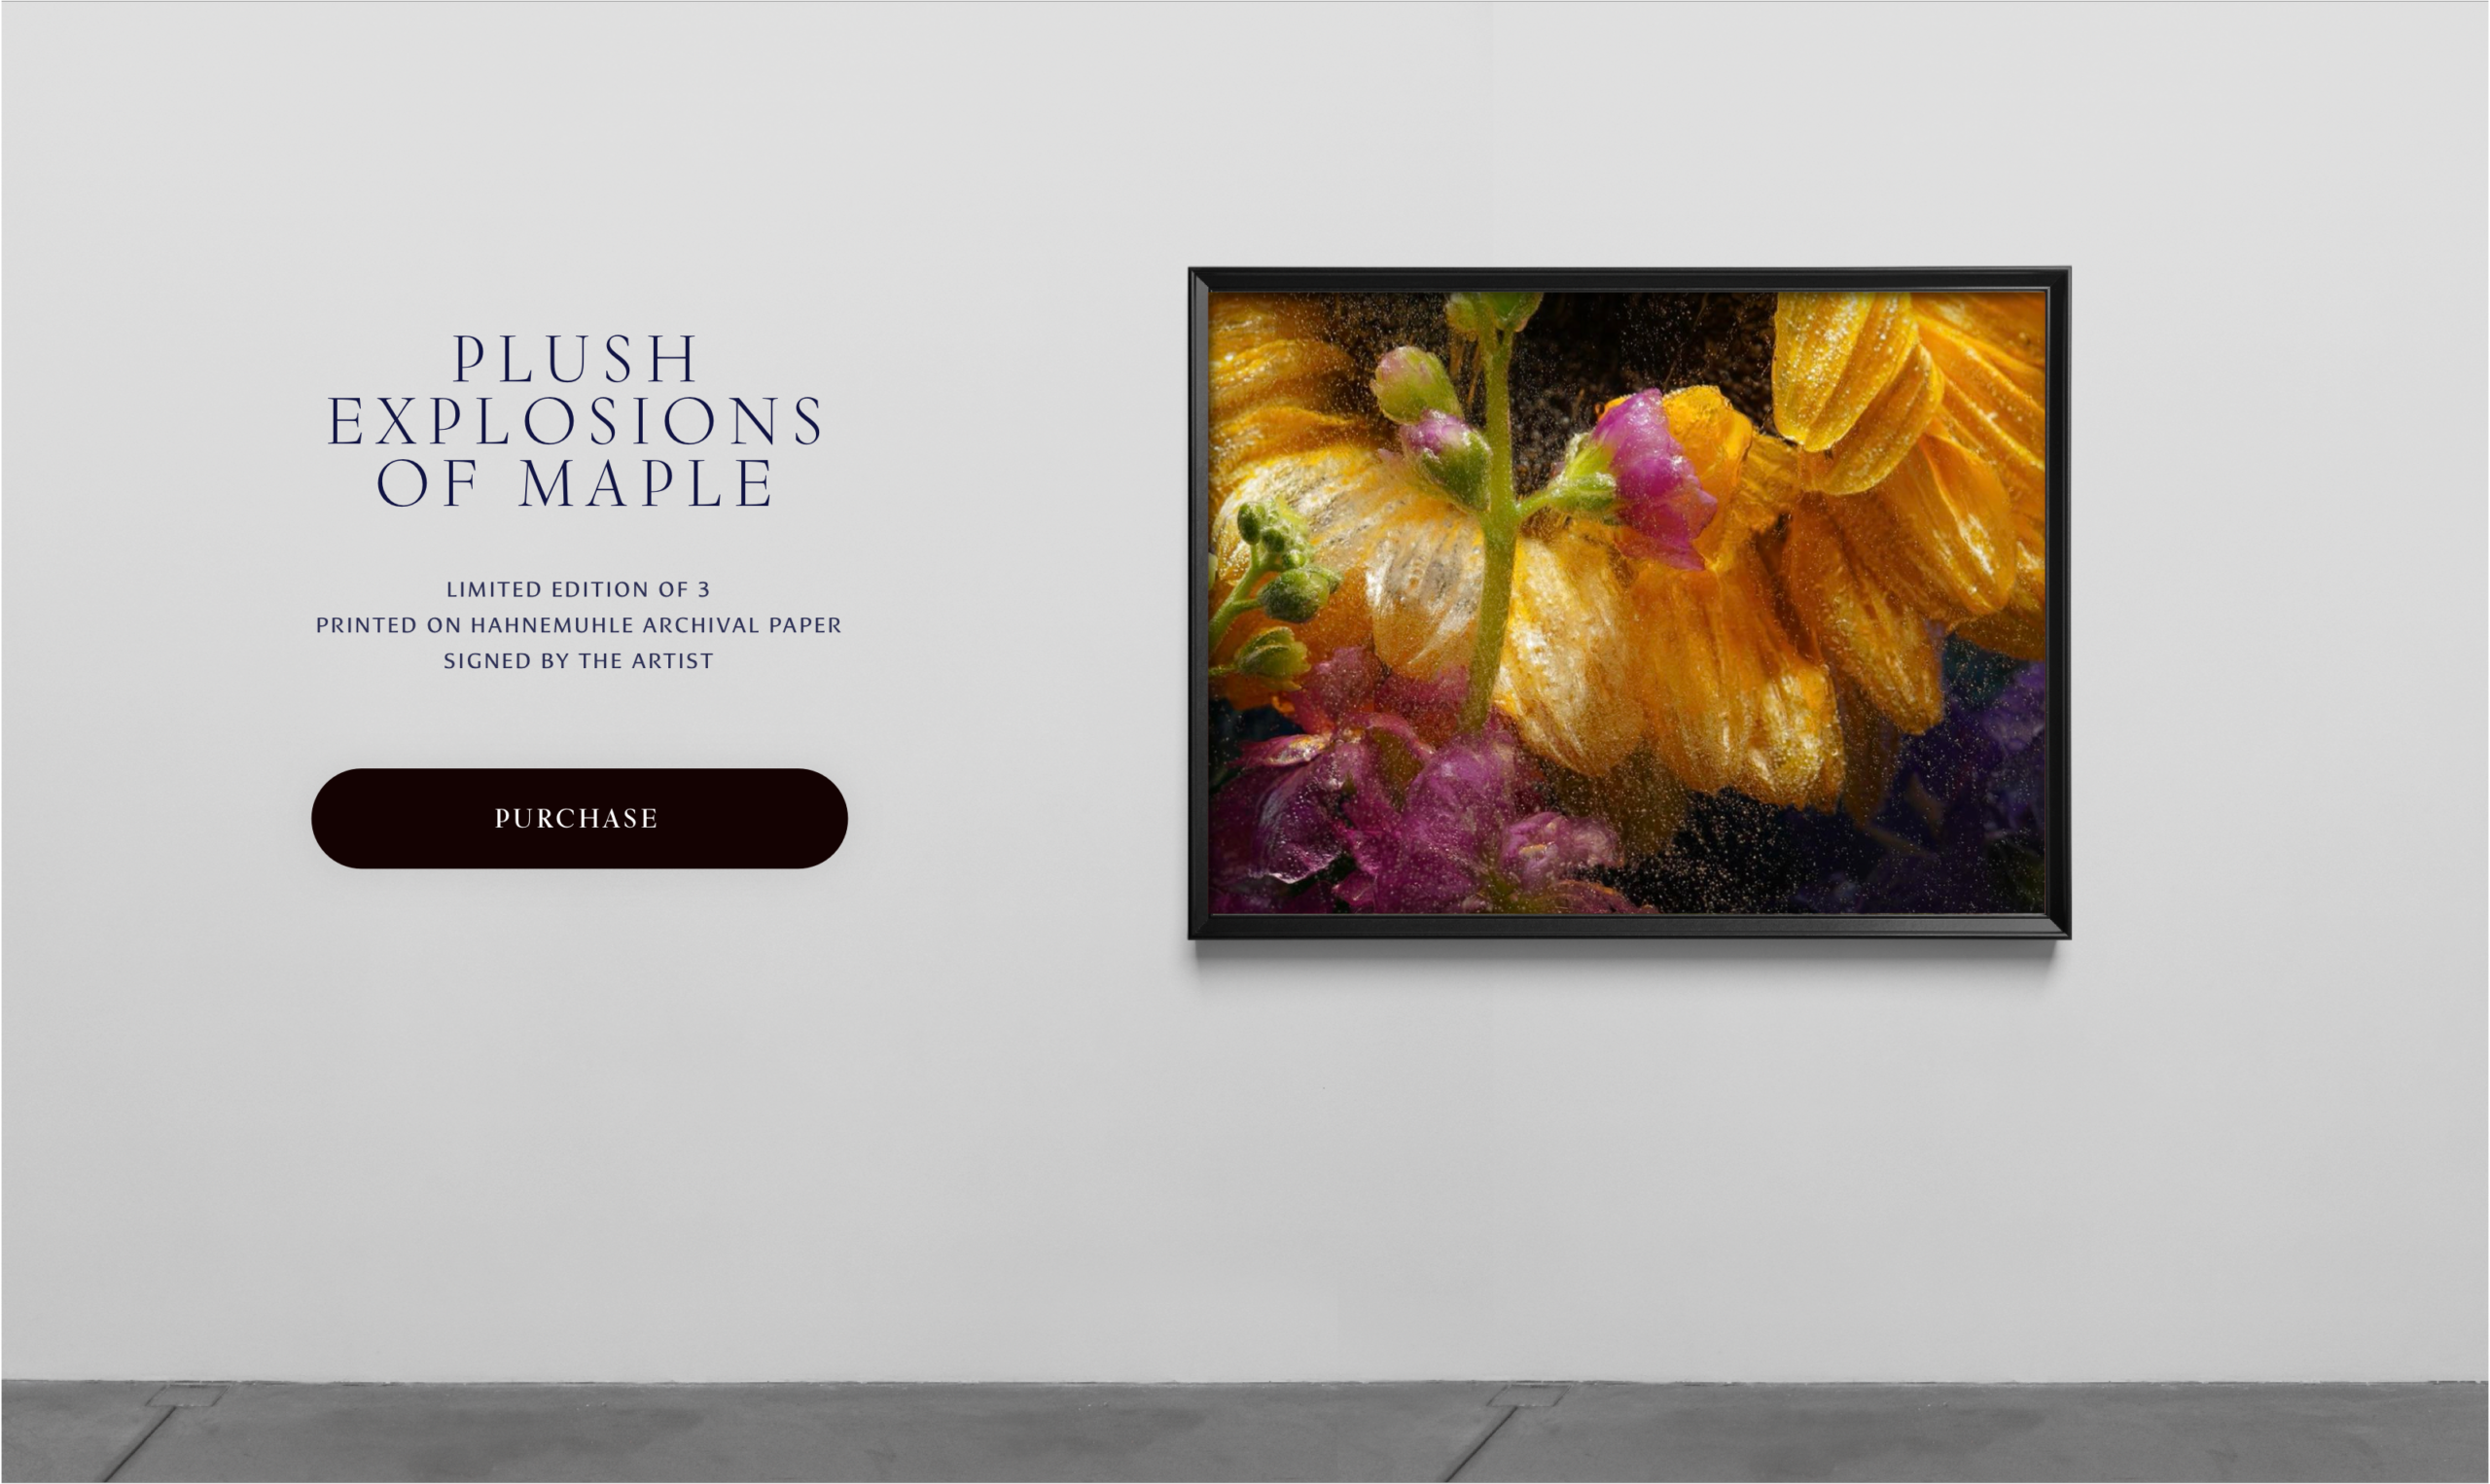 Screenshot of a webpage “EXPLOSIONS OF MAPLE” LIMITED EDITION OF 3 “PRINTED ON HAHNEMUHLE ARCHIVAL PAPER SIGNED BY THE ARTIST” There is a framed picture of the art A button invites you to “purchase”